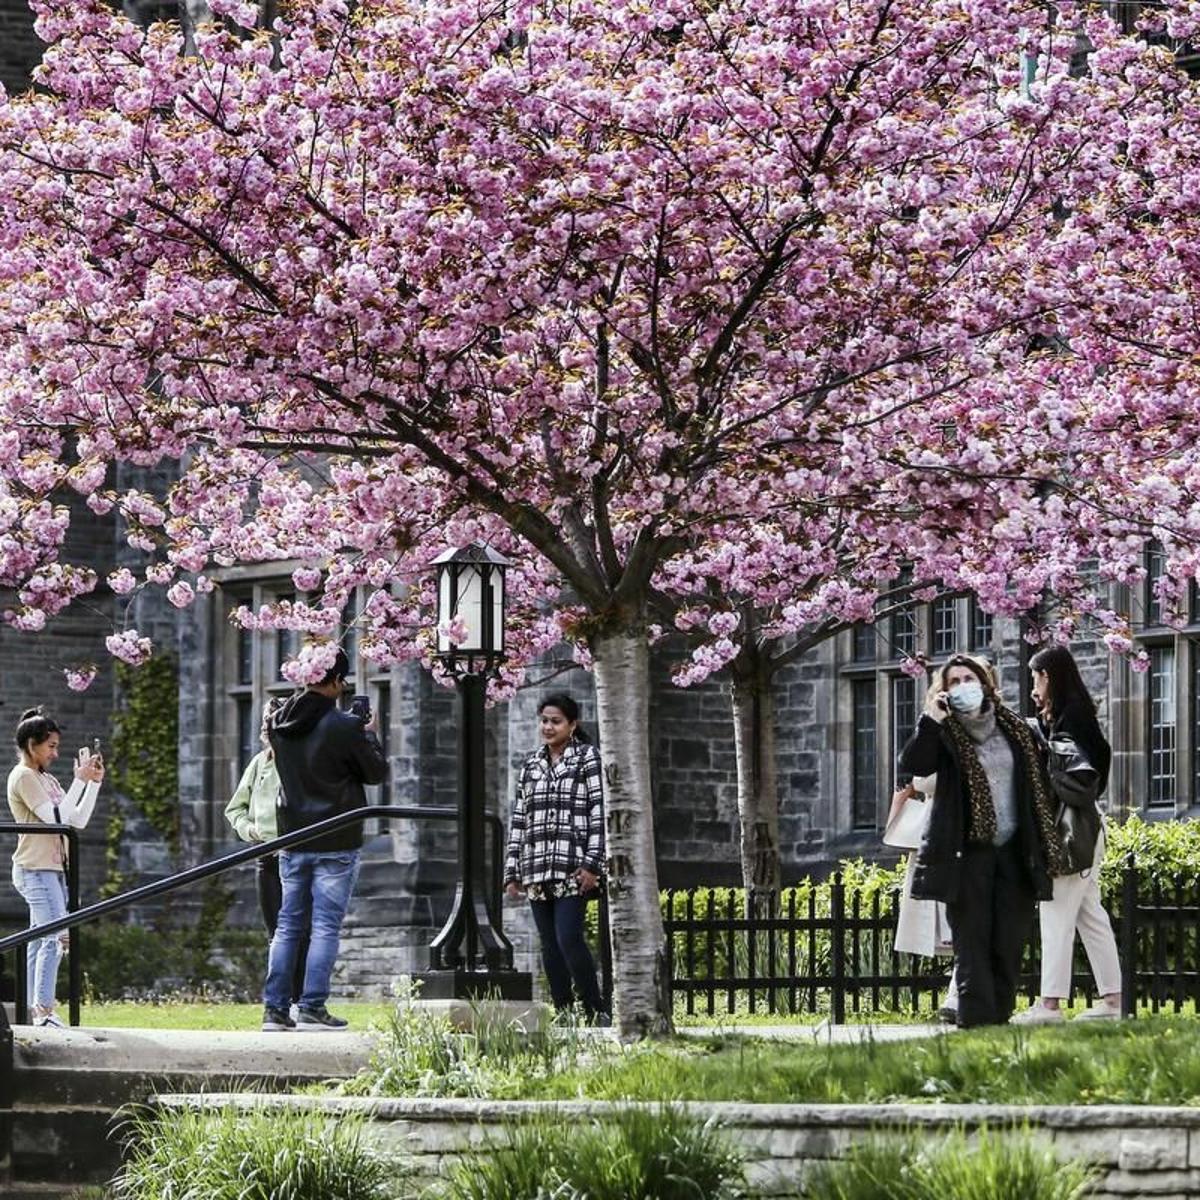 Sick of cherry blossom crowds at High Park? Here are other spots